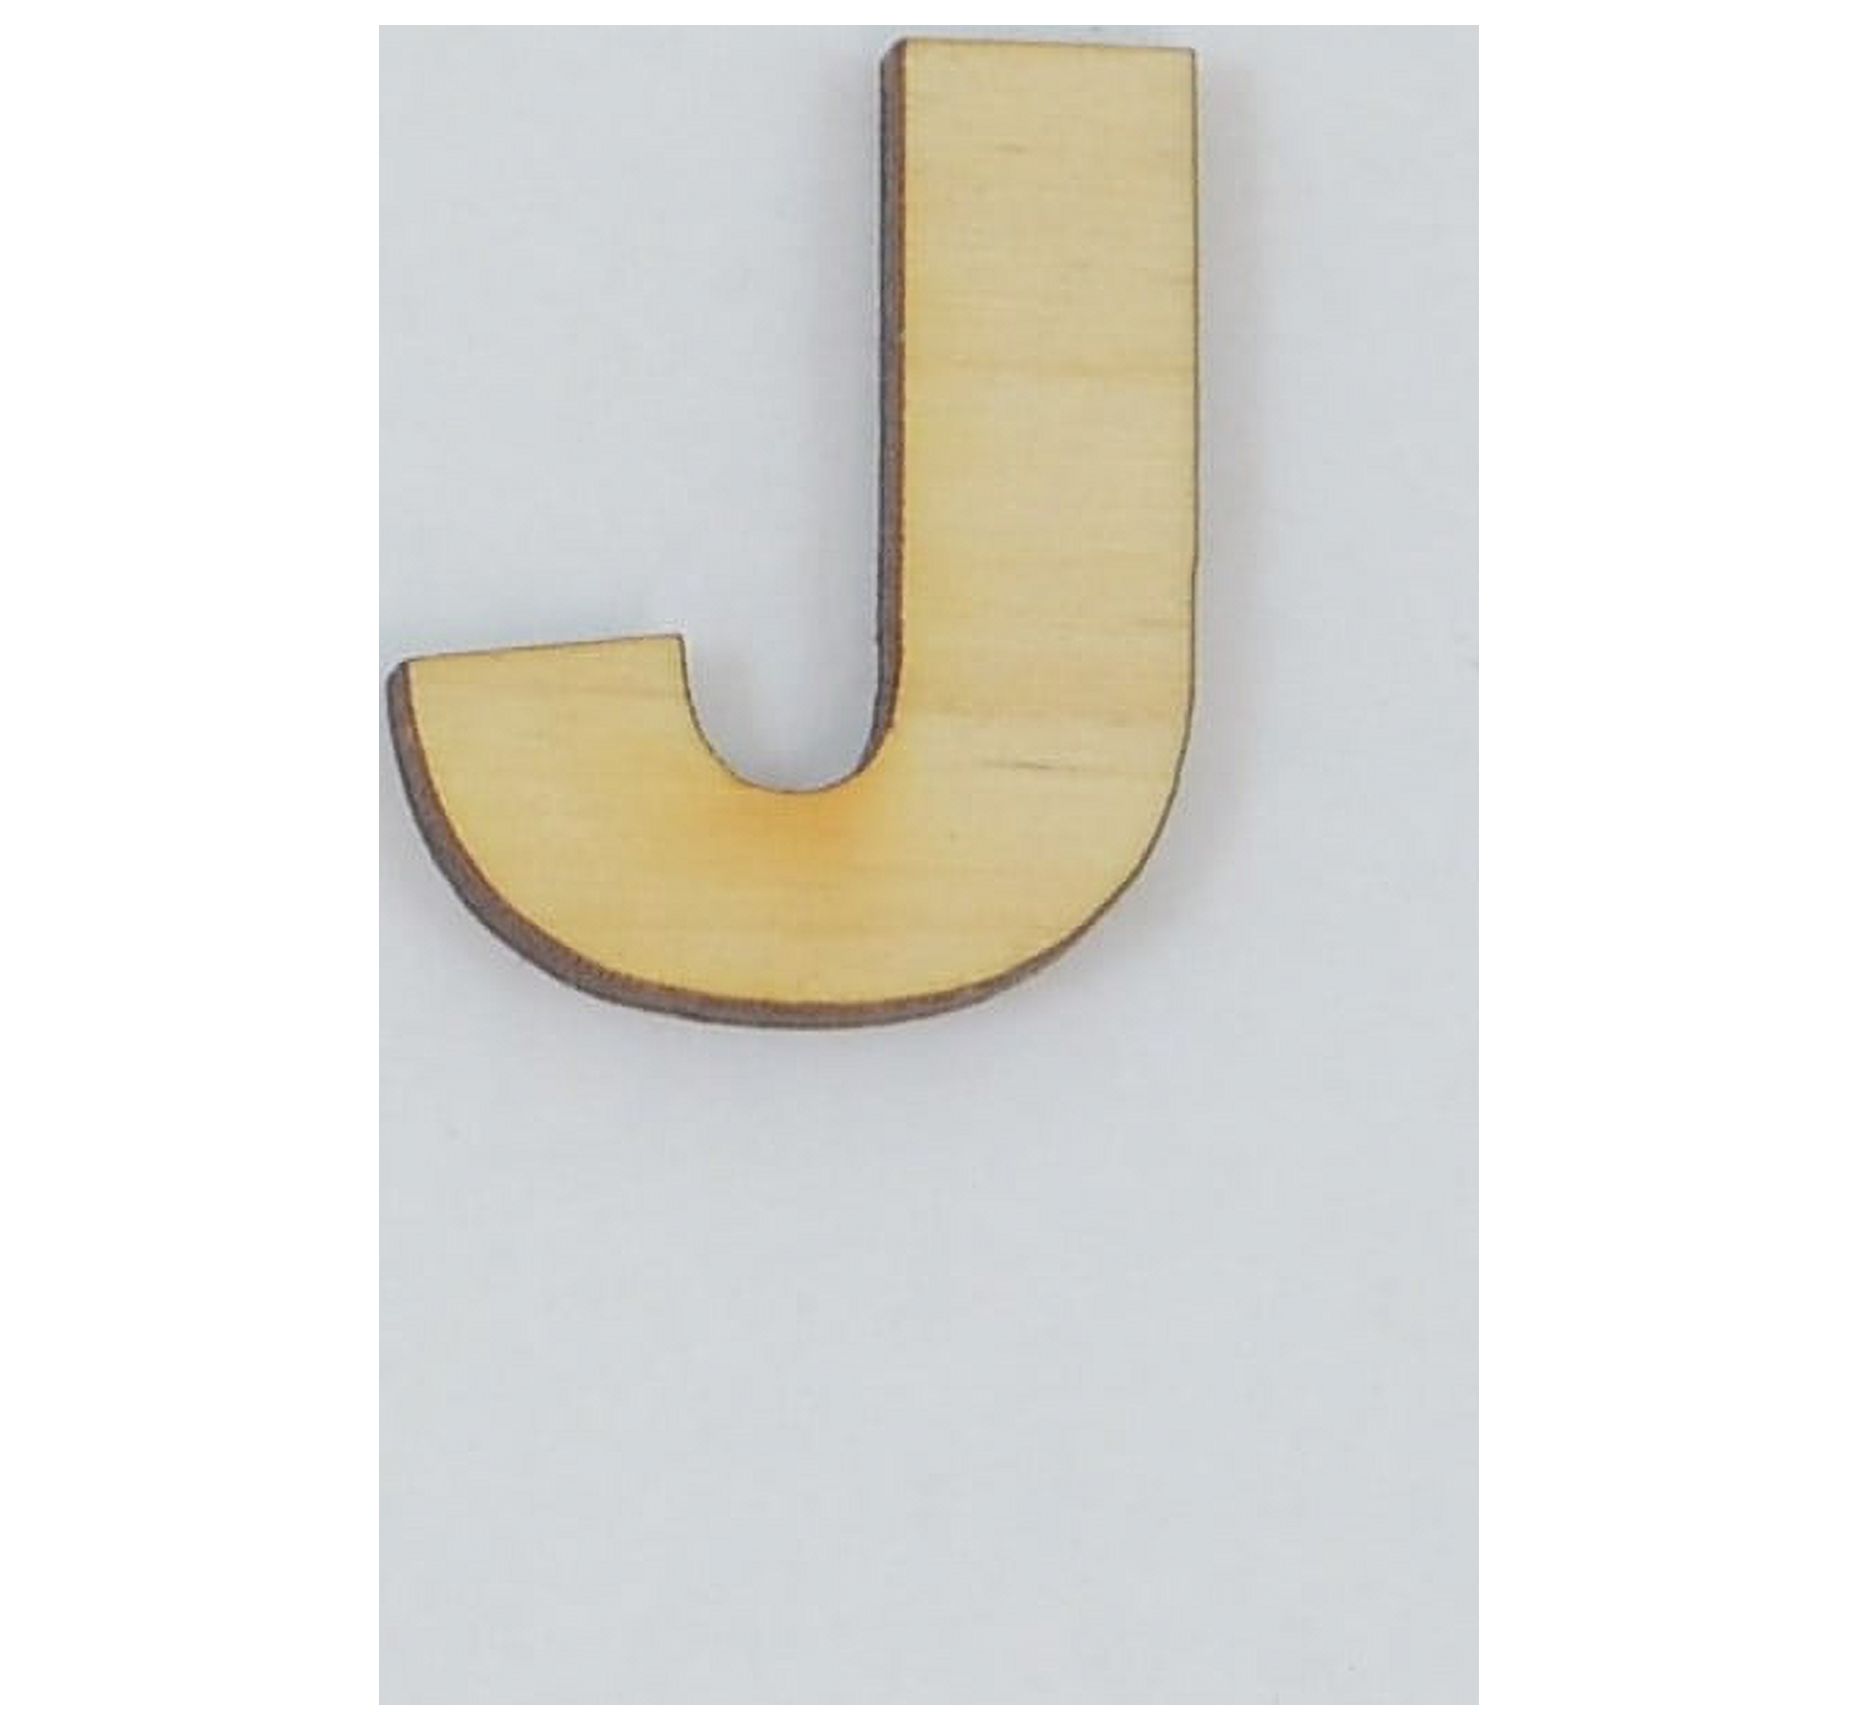 1 Pc, 6 Inch X 1/4 Inch Thick Wood Letters J In The Arial Font For Craft  Project & Different Decor 